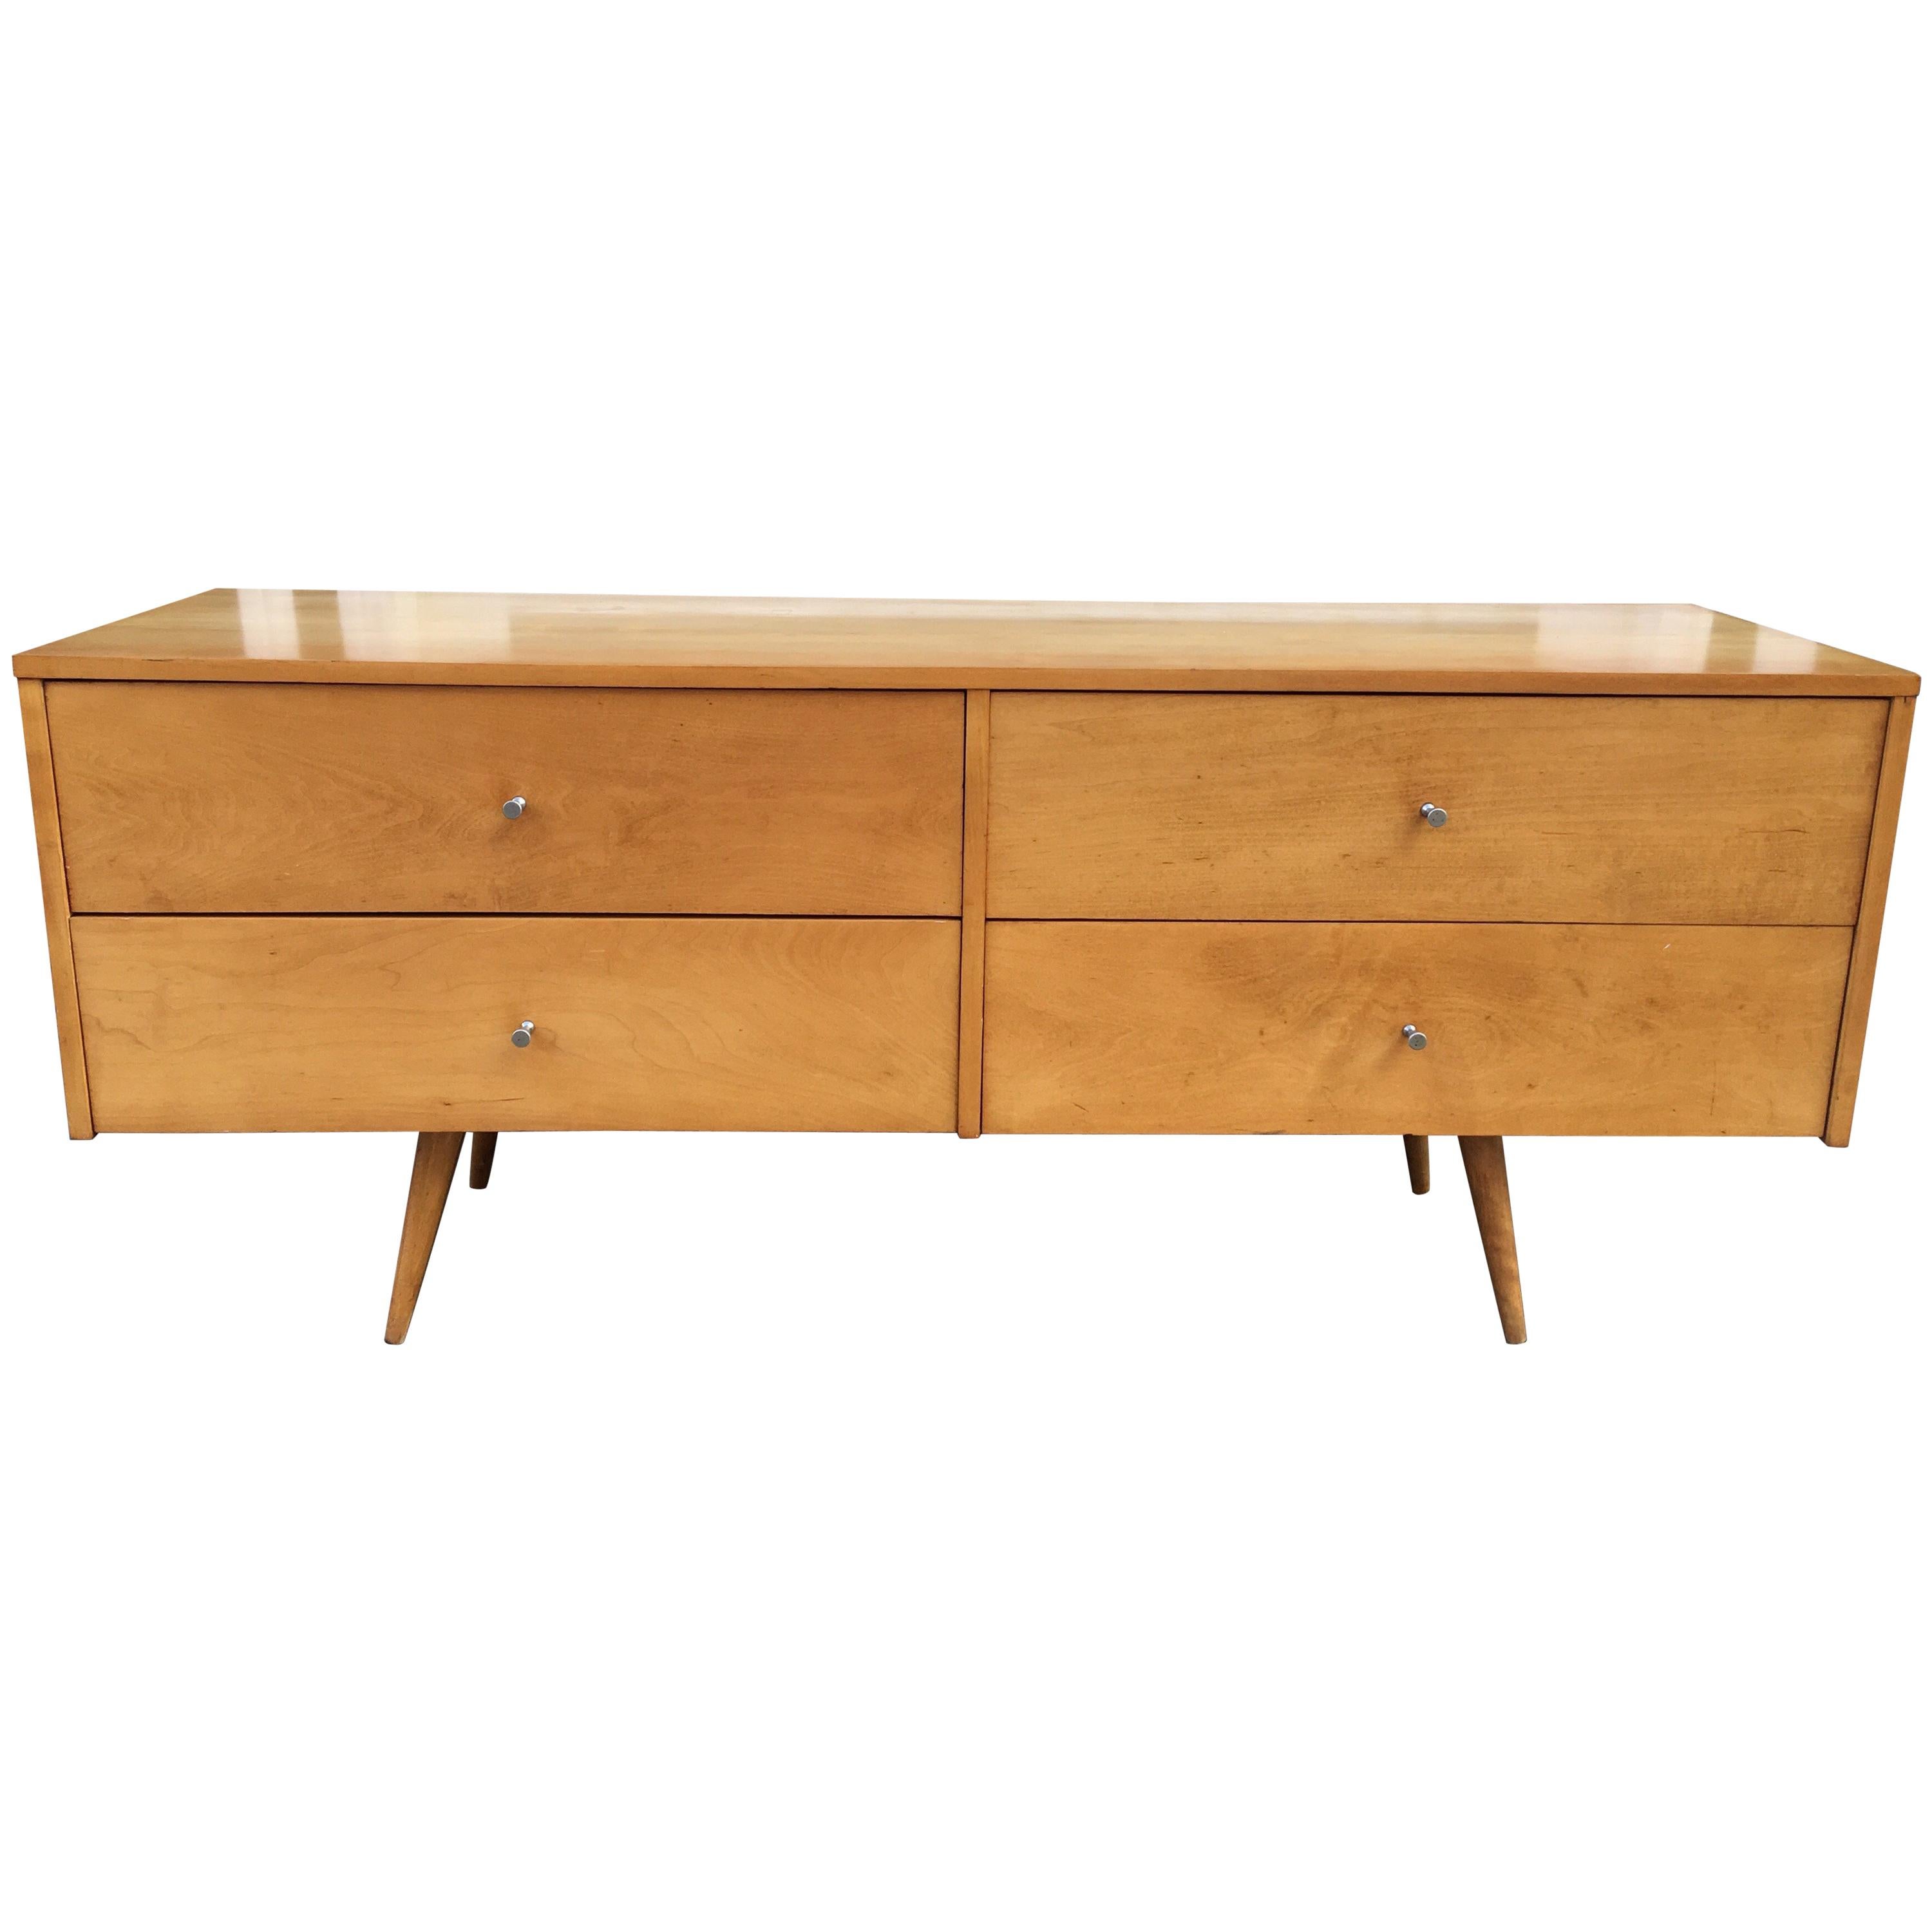 Paul McCobb 4-Drawer Low Dresser for Winchendon Furniture Company